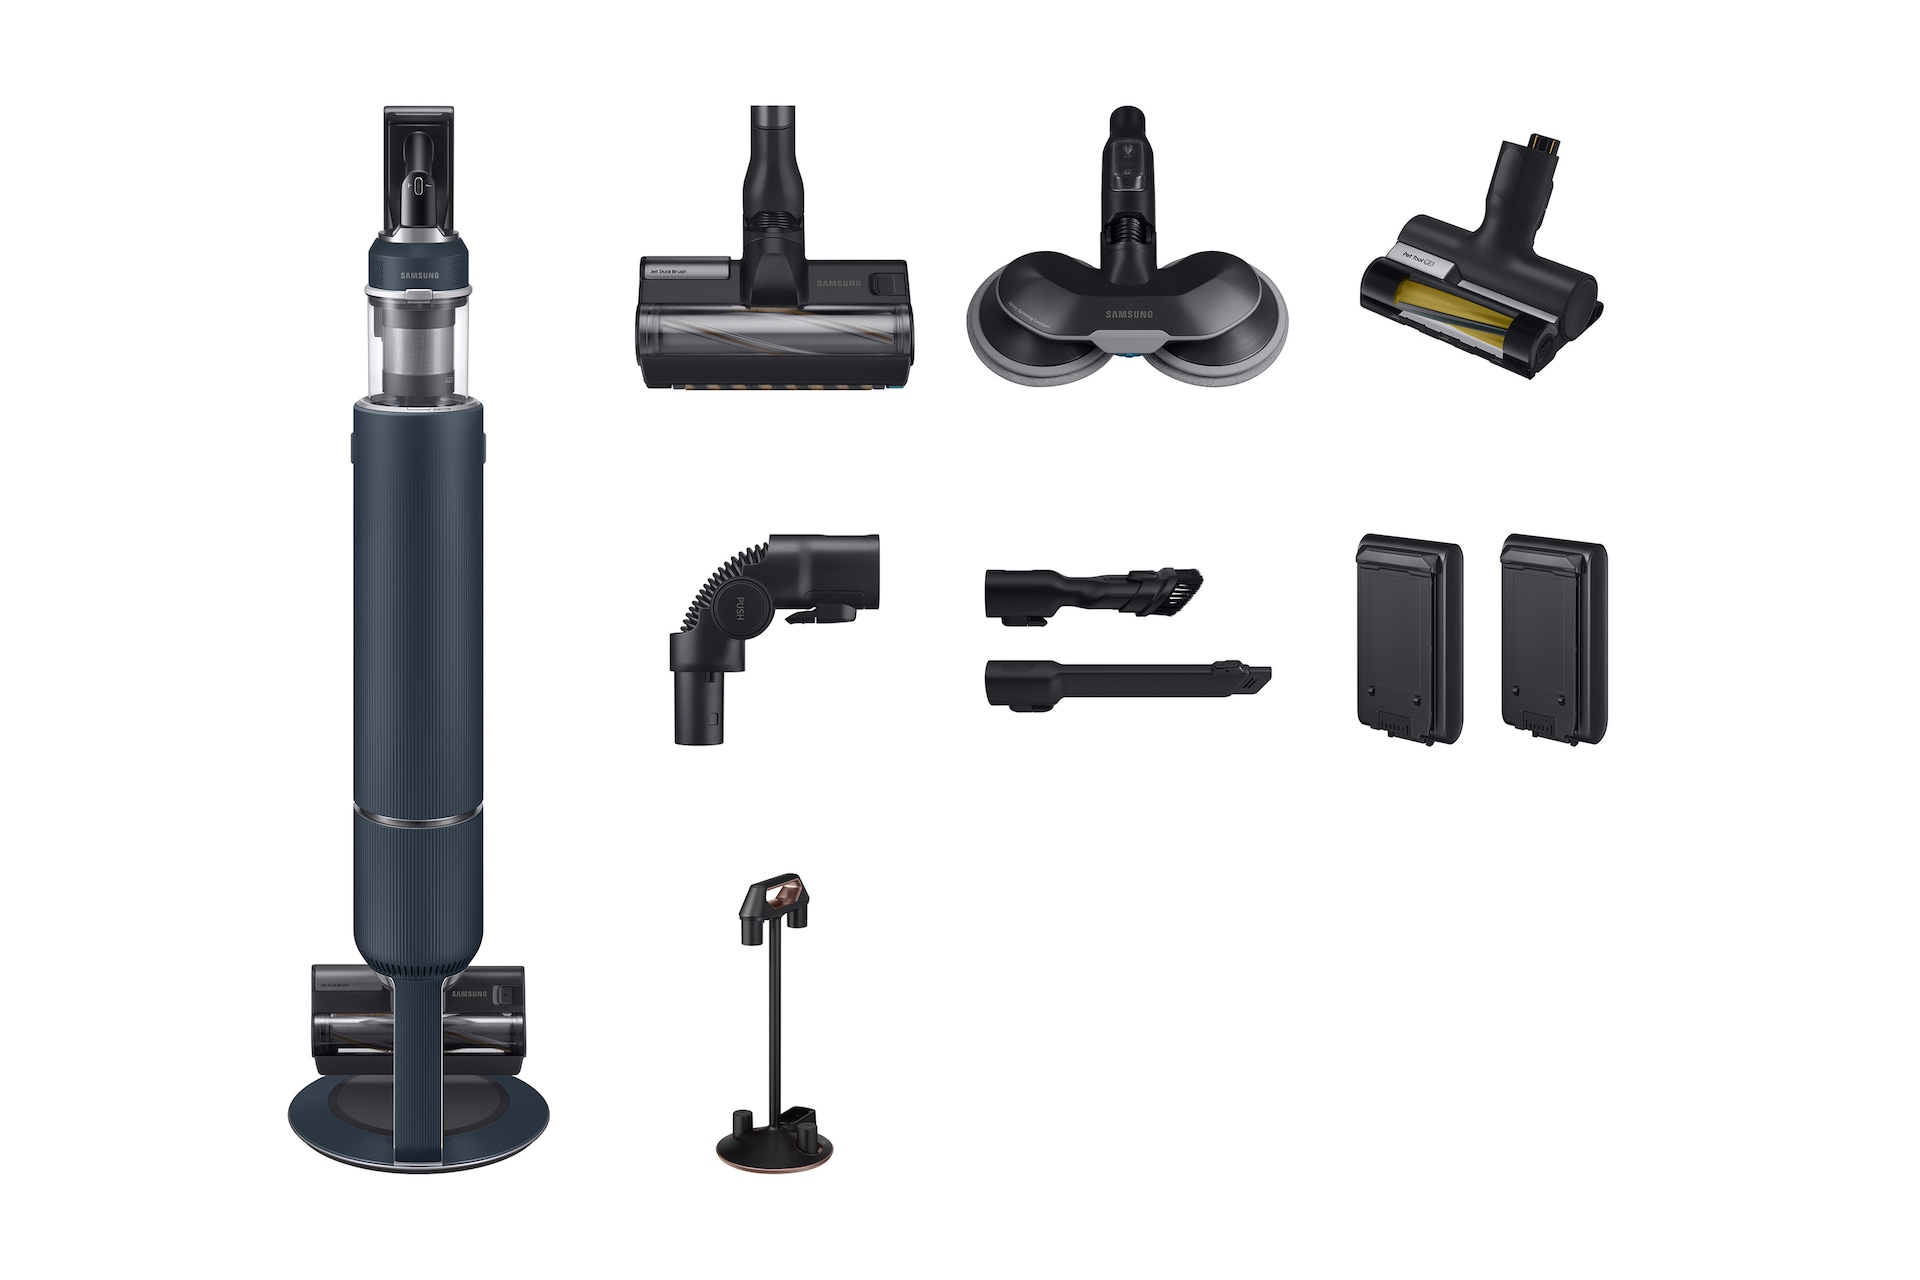 Support and troubleshooting for your Dyson V10™ cordless vacuum cleaner 